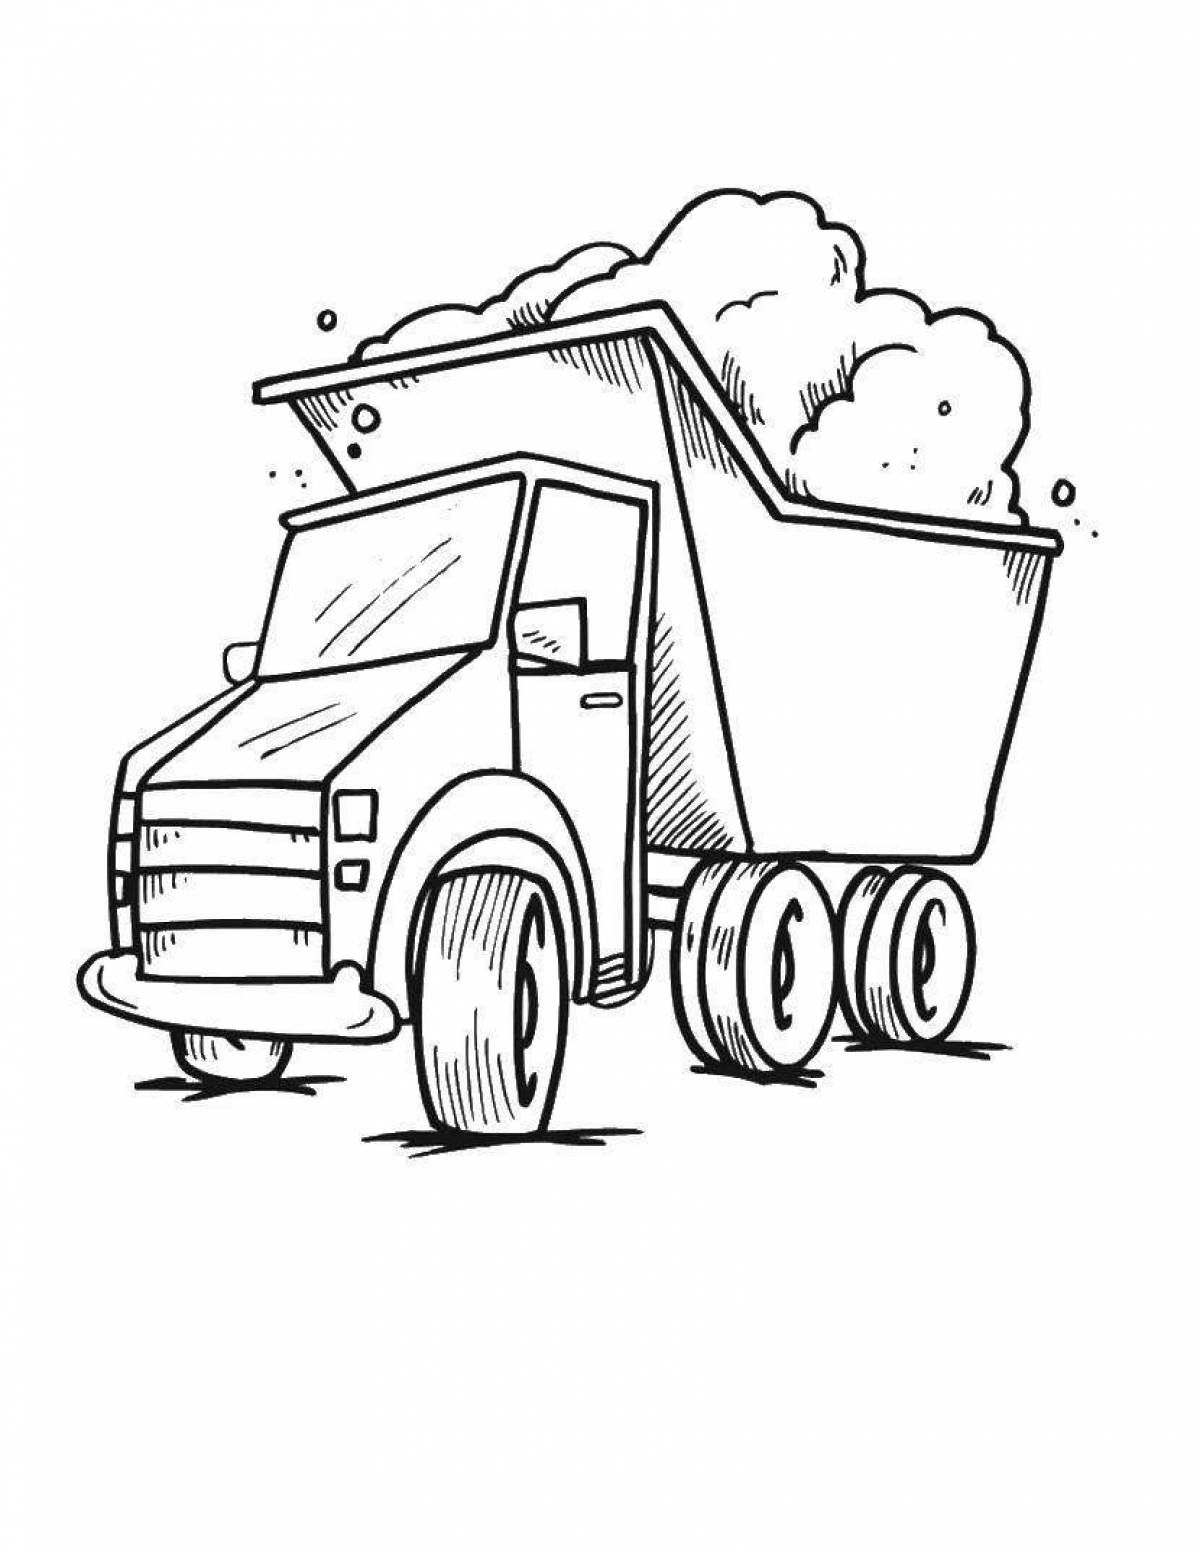 Exquisite snowplow coloring page